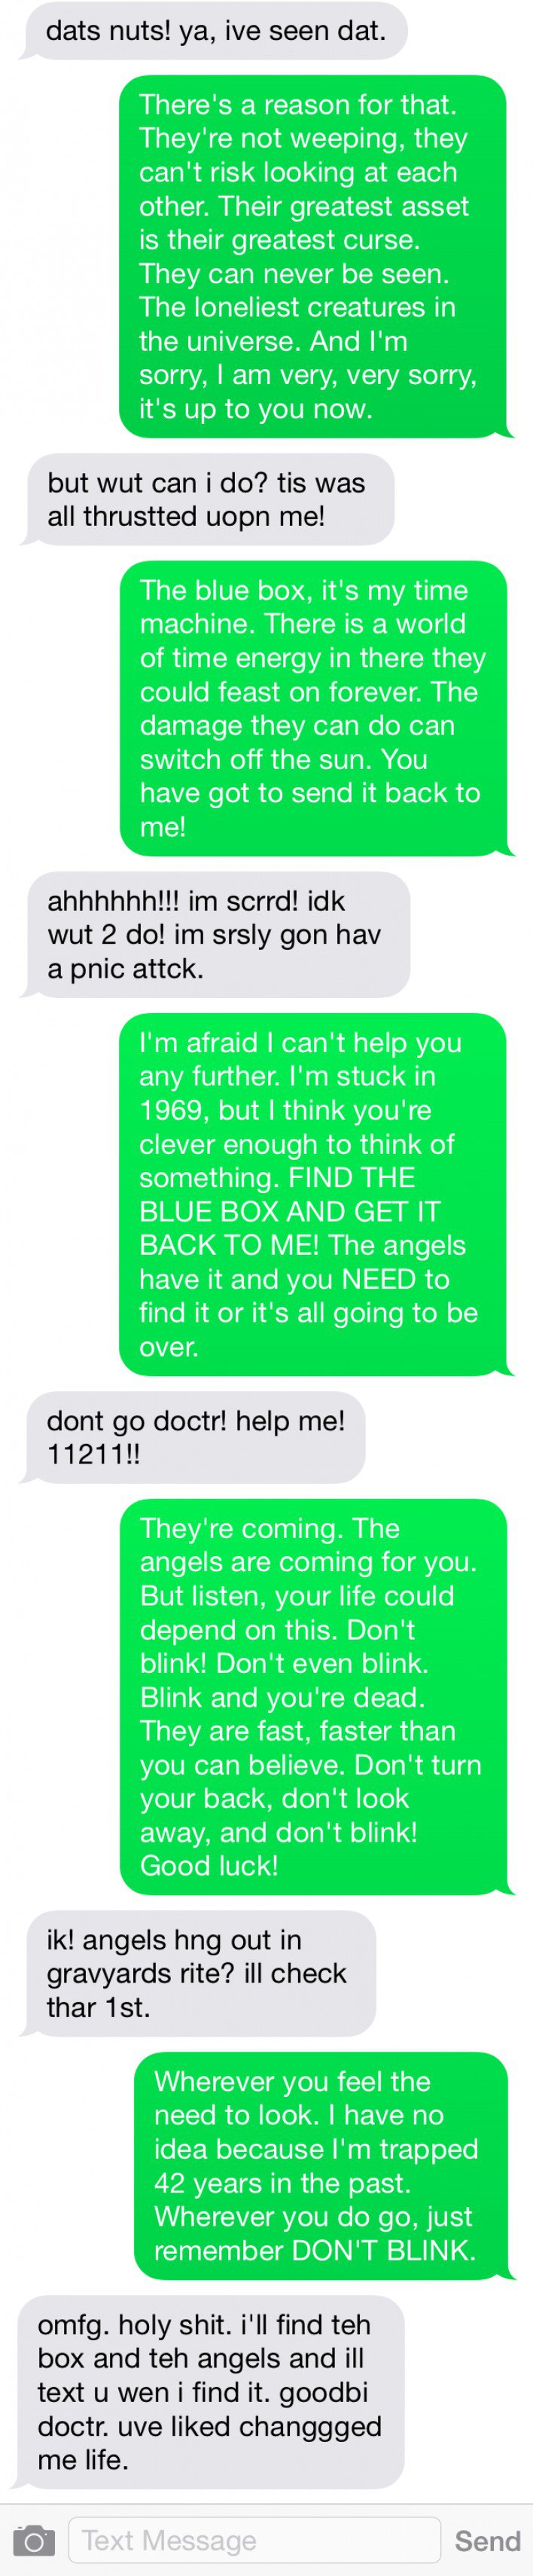 What Happens What Happens When a Drunk Texts a Doctor Who Fan